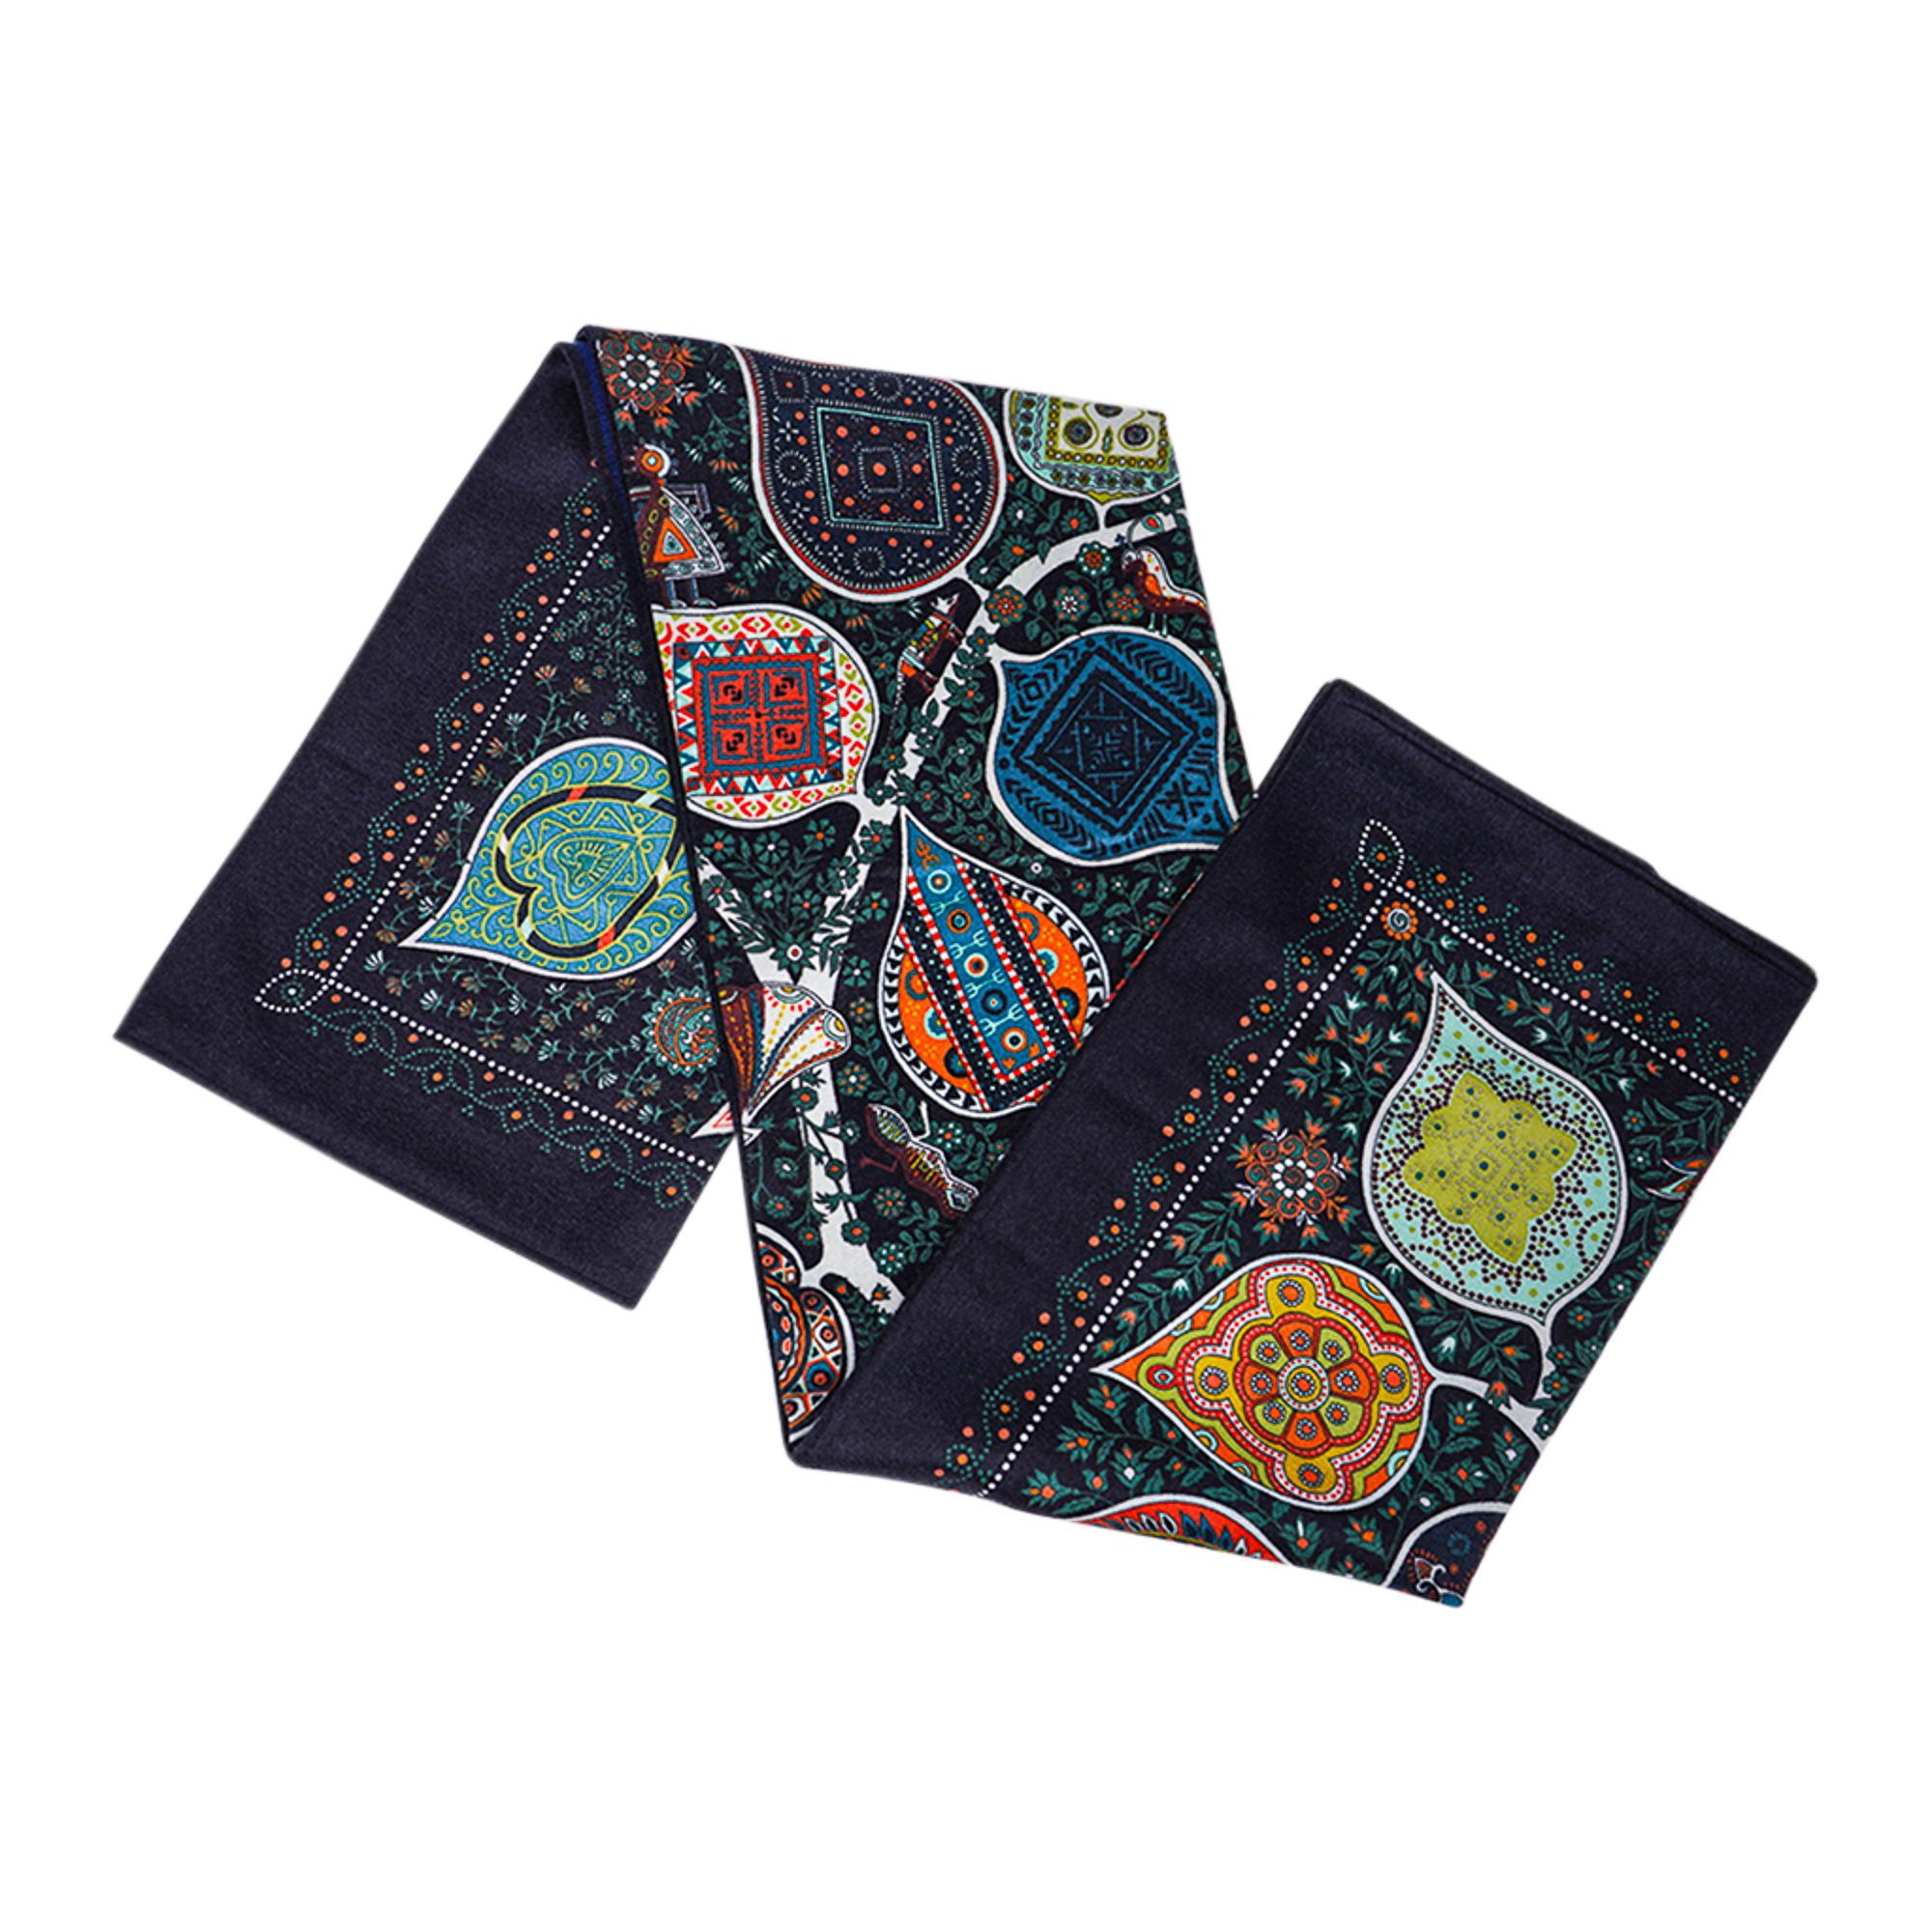 Mightychic offers a limited edition Hermes rare multicolored L'Arbre de Vie (Tree of Life) blanket.
Designed by Christine Henry in 2012.
A beautiful expression of paisley inspired leaves.
This fabulous blanket is a chic addition to any room.
Fabric